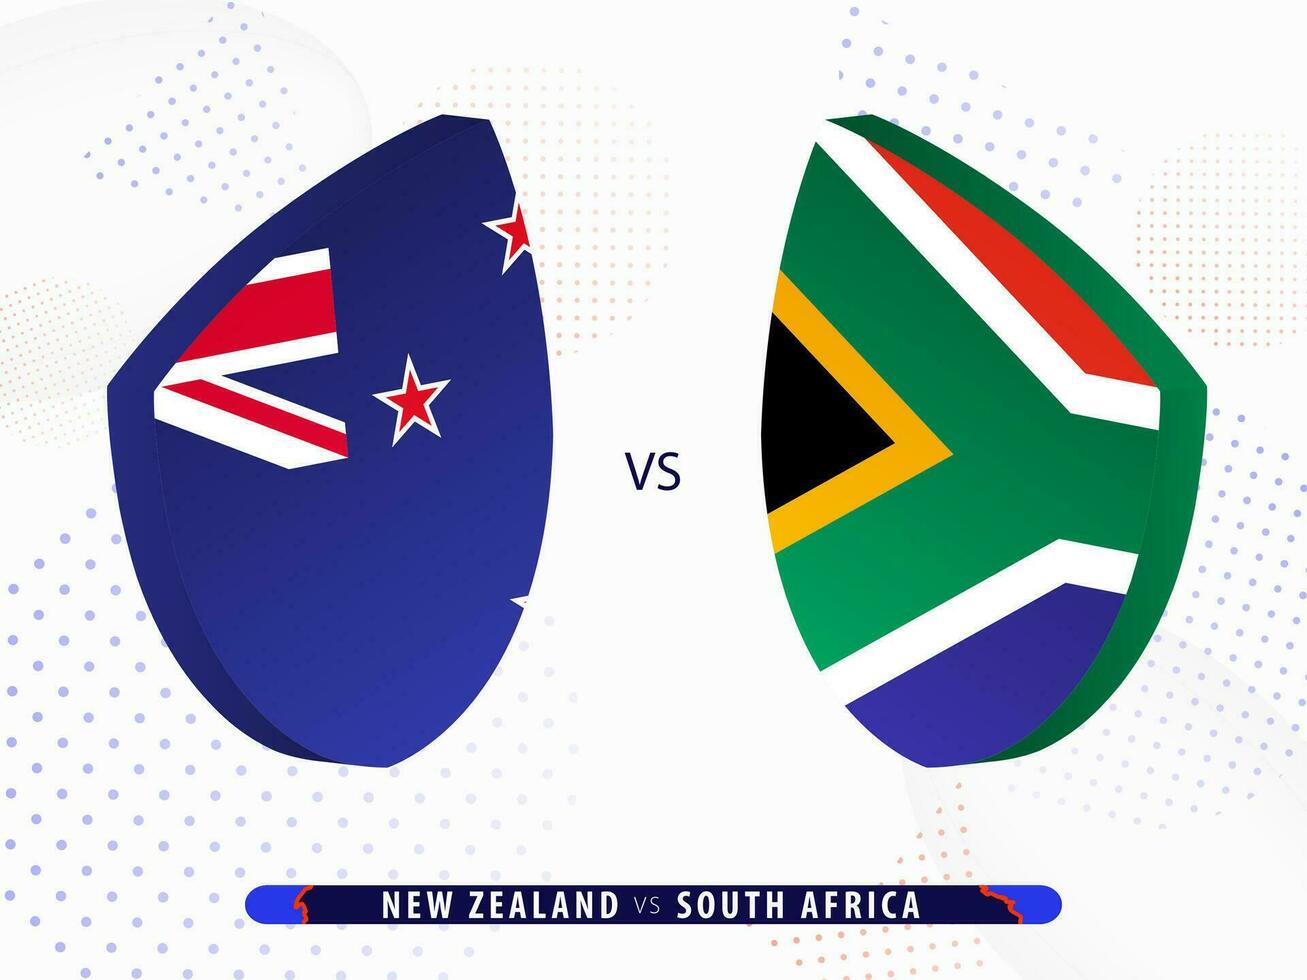 New Zealand vs South Africa final rugby match, international rugby competition 2023. vector